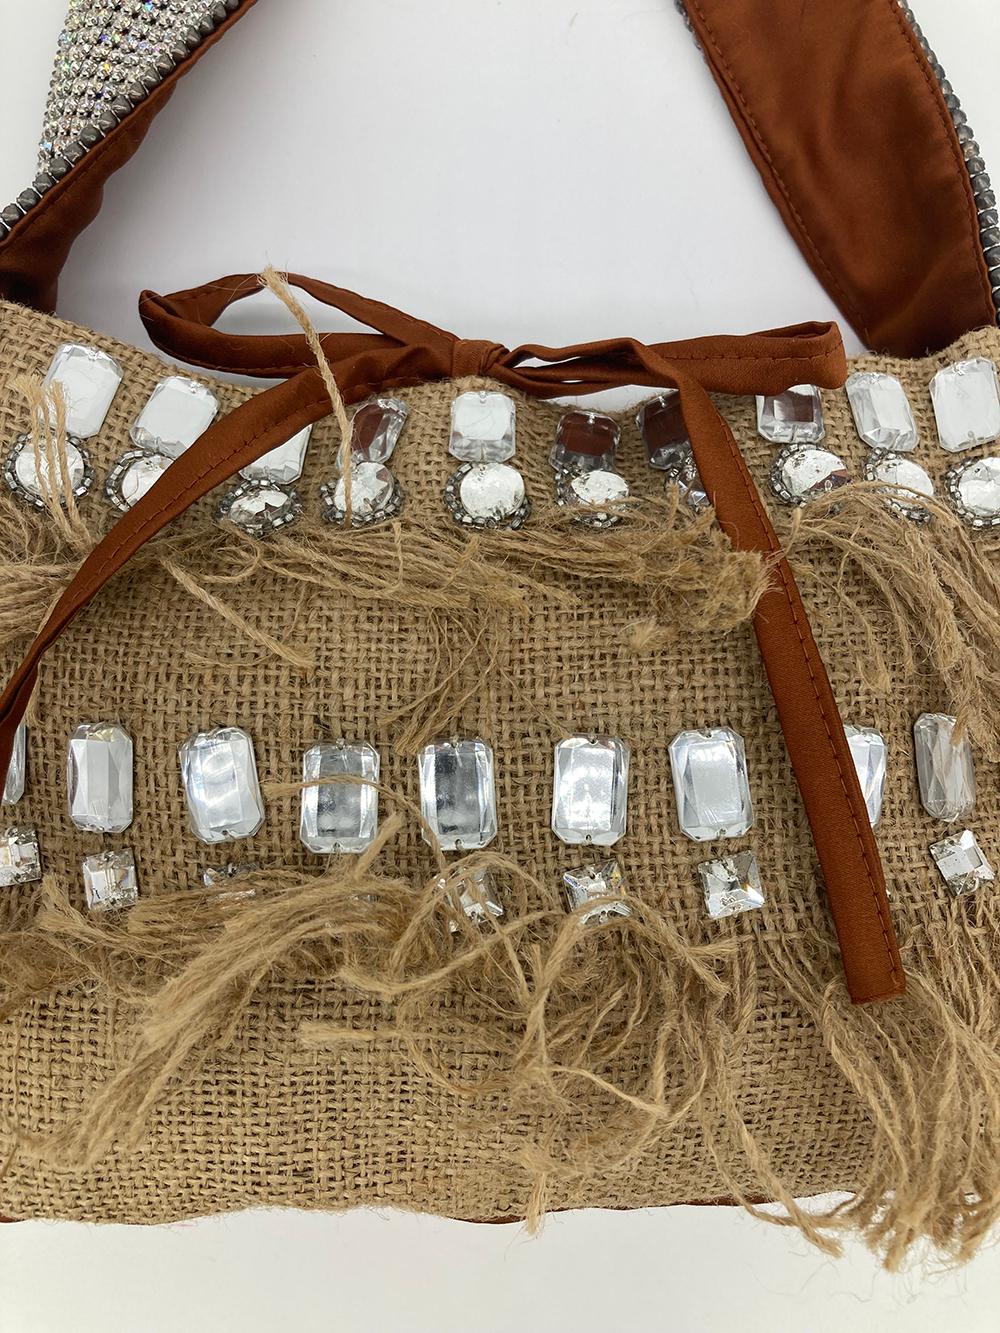 Dolce and Gabbana Crystal Rhinestone Burlap Shoulder Bag In Excellent Condition For Sale In Philadelphia, PA